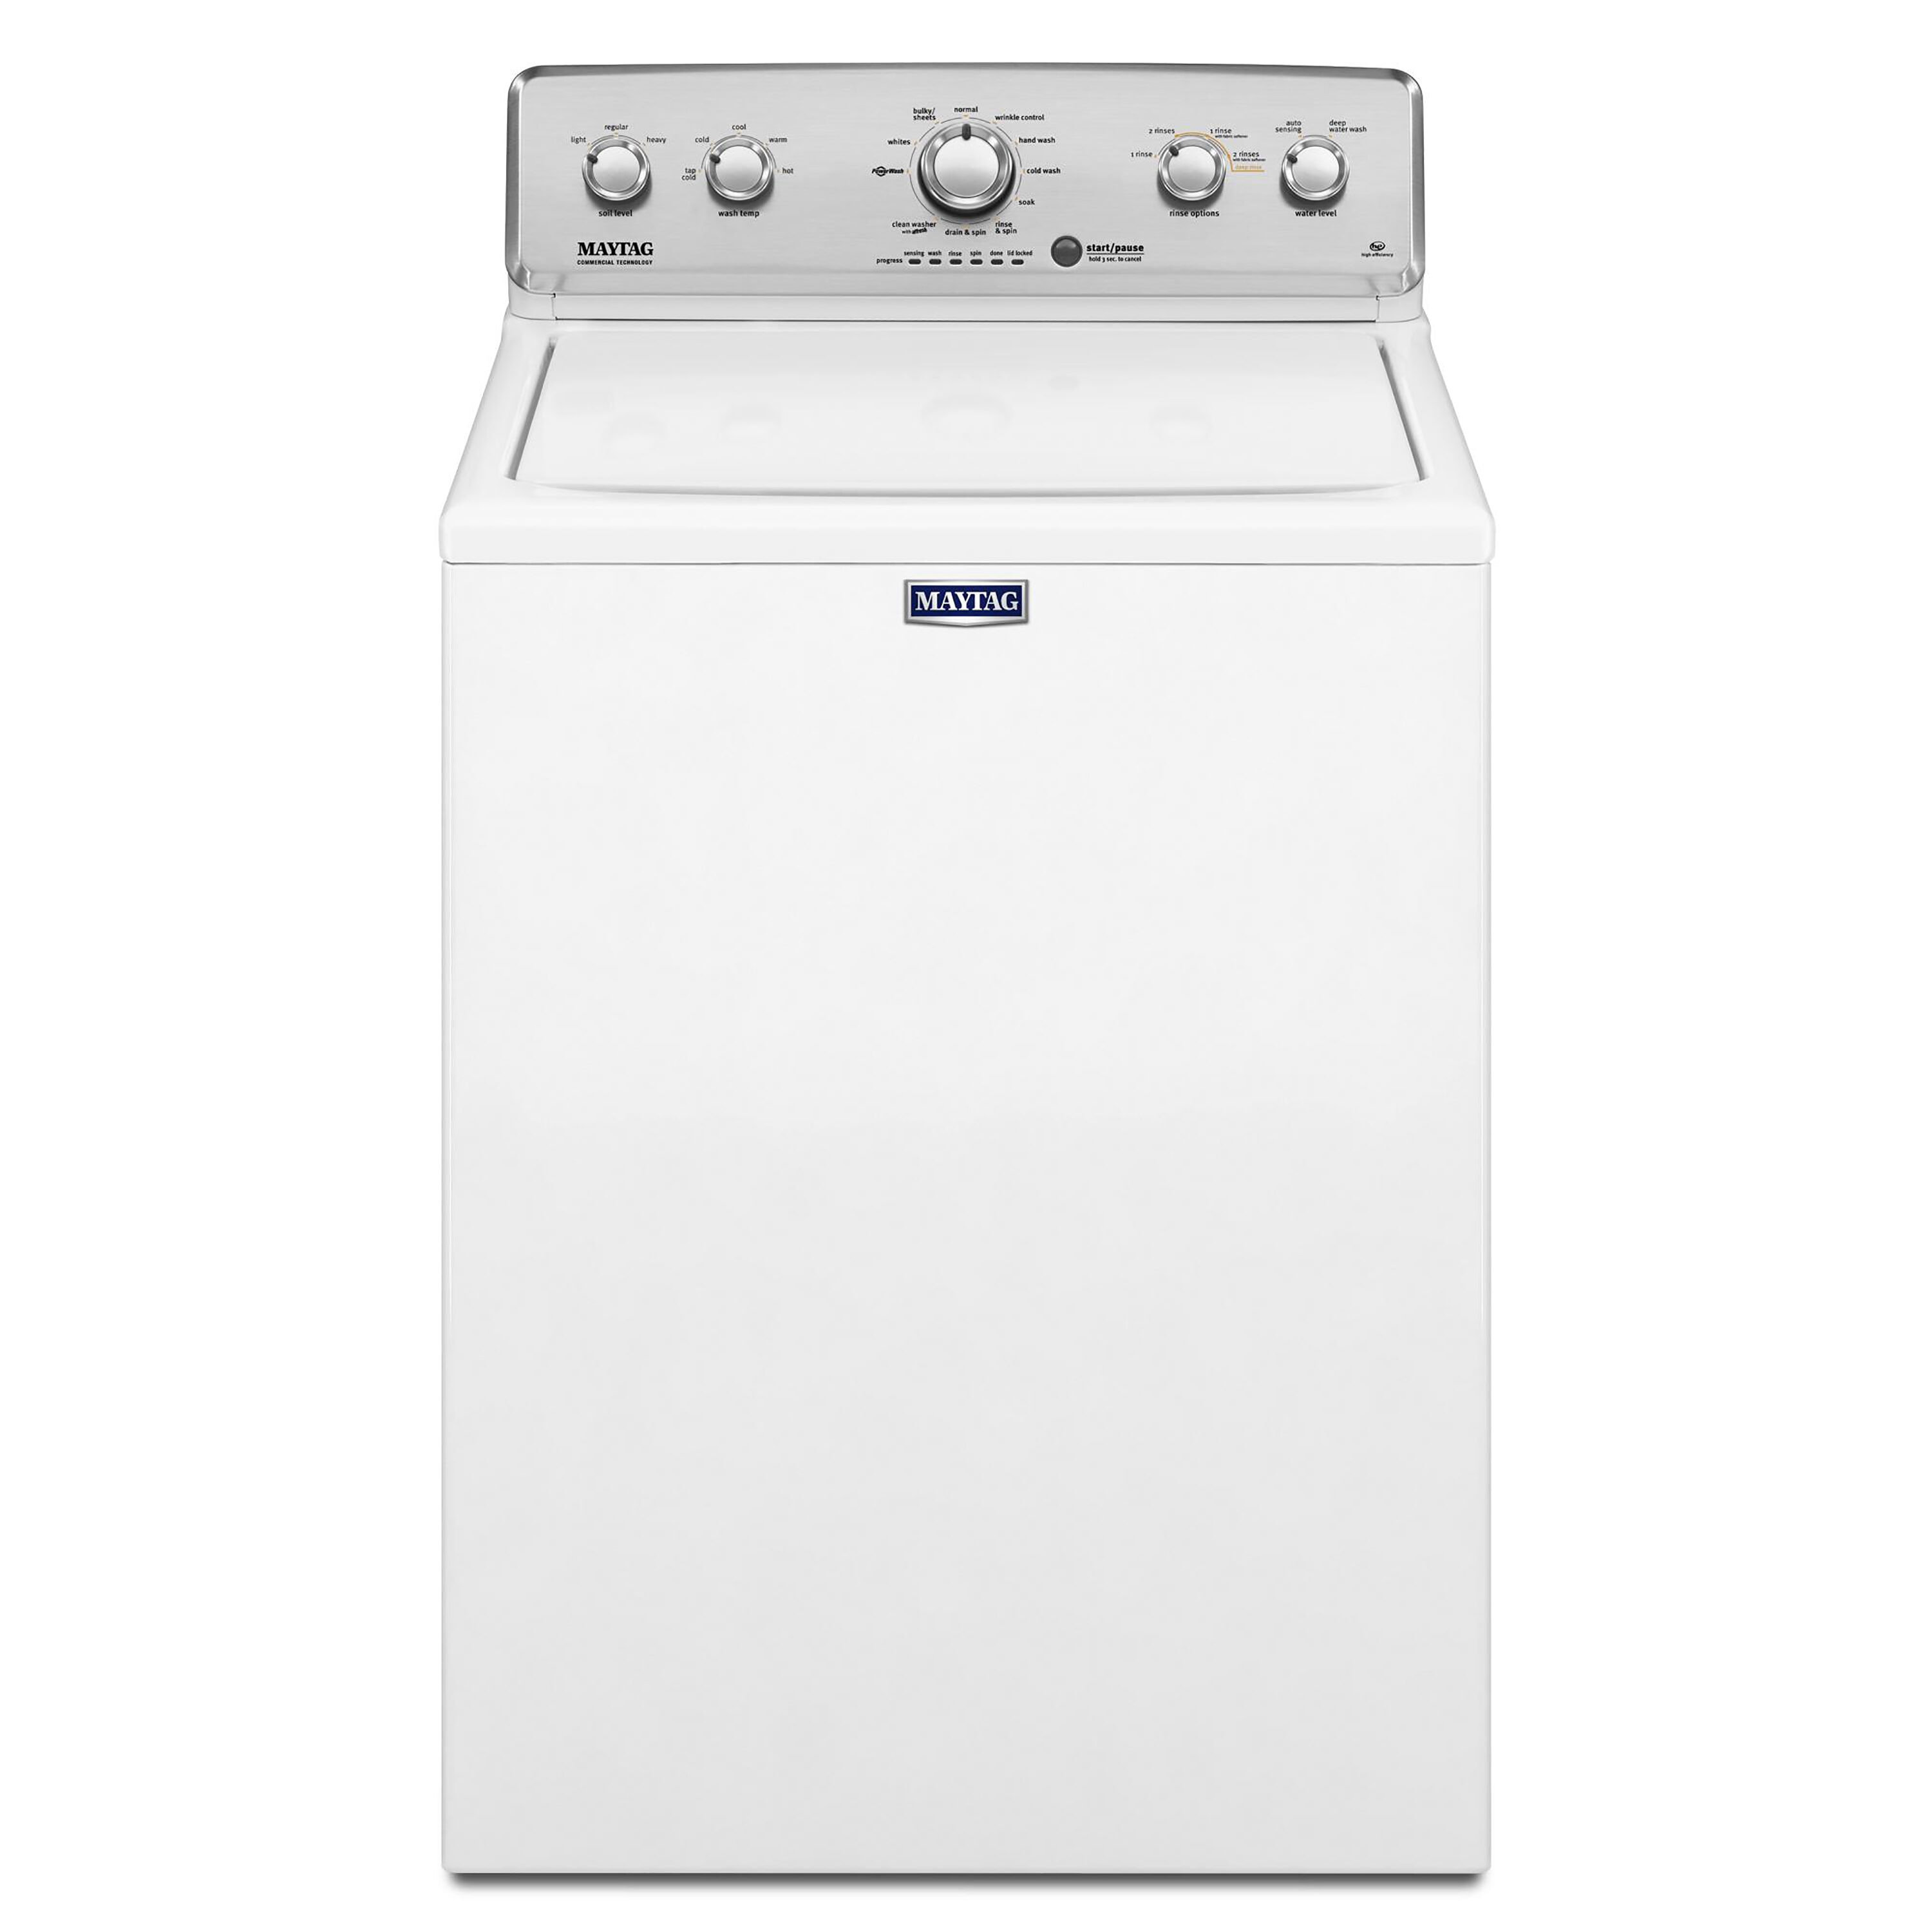 4.2-cu ft High Efficiency Agitator Top-Load Washer (White) Stainless Steel | - Maytag MVWC565FW